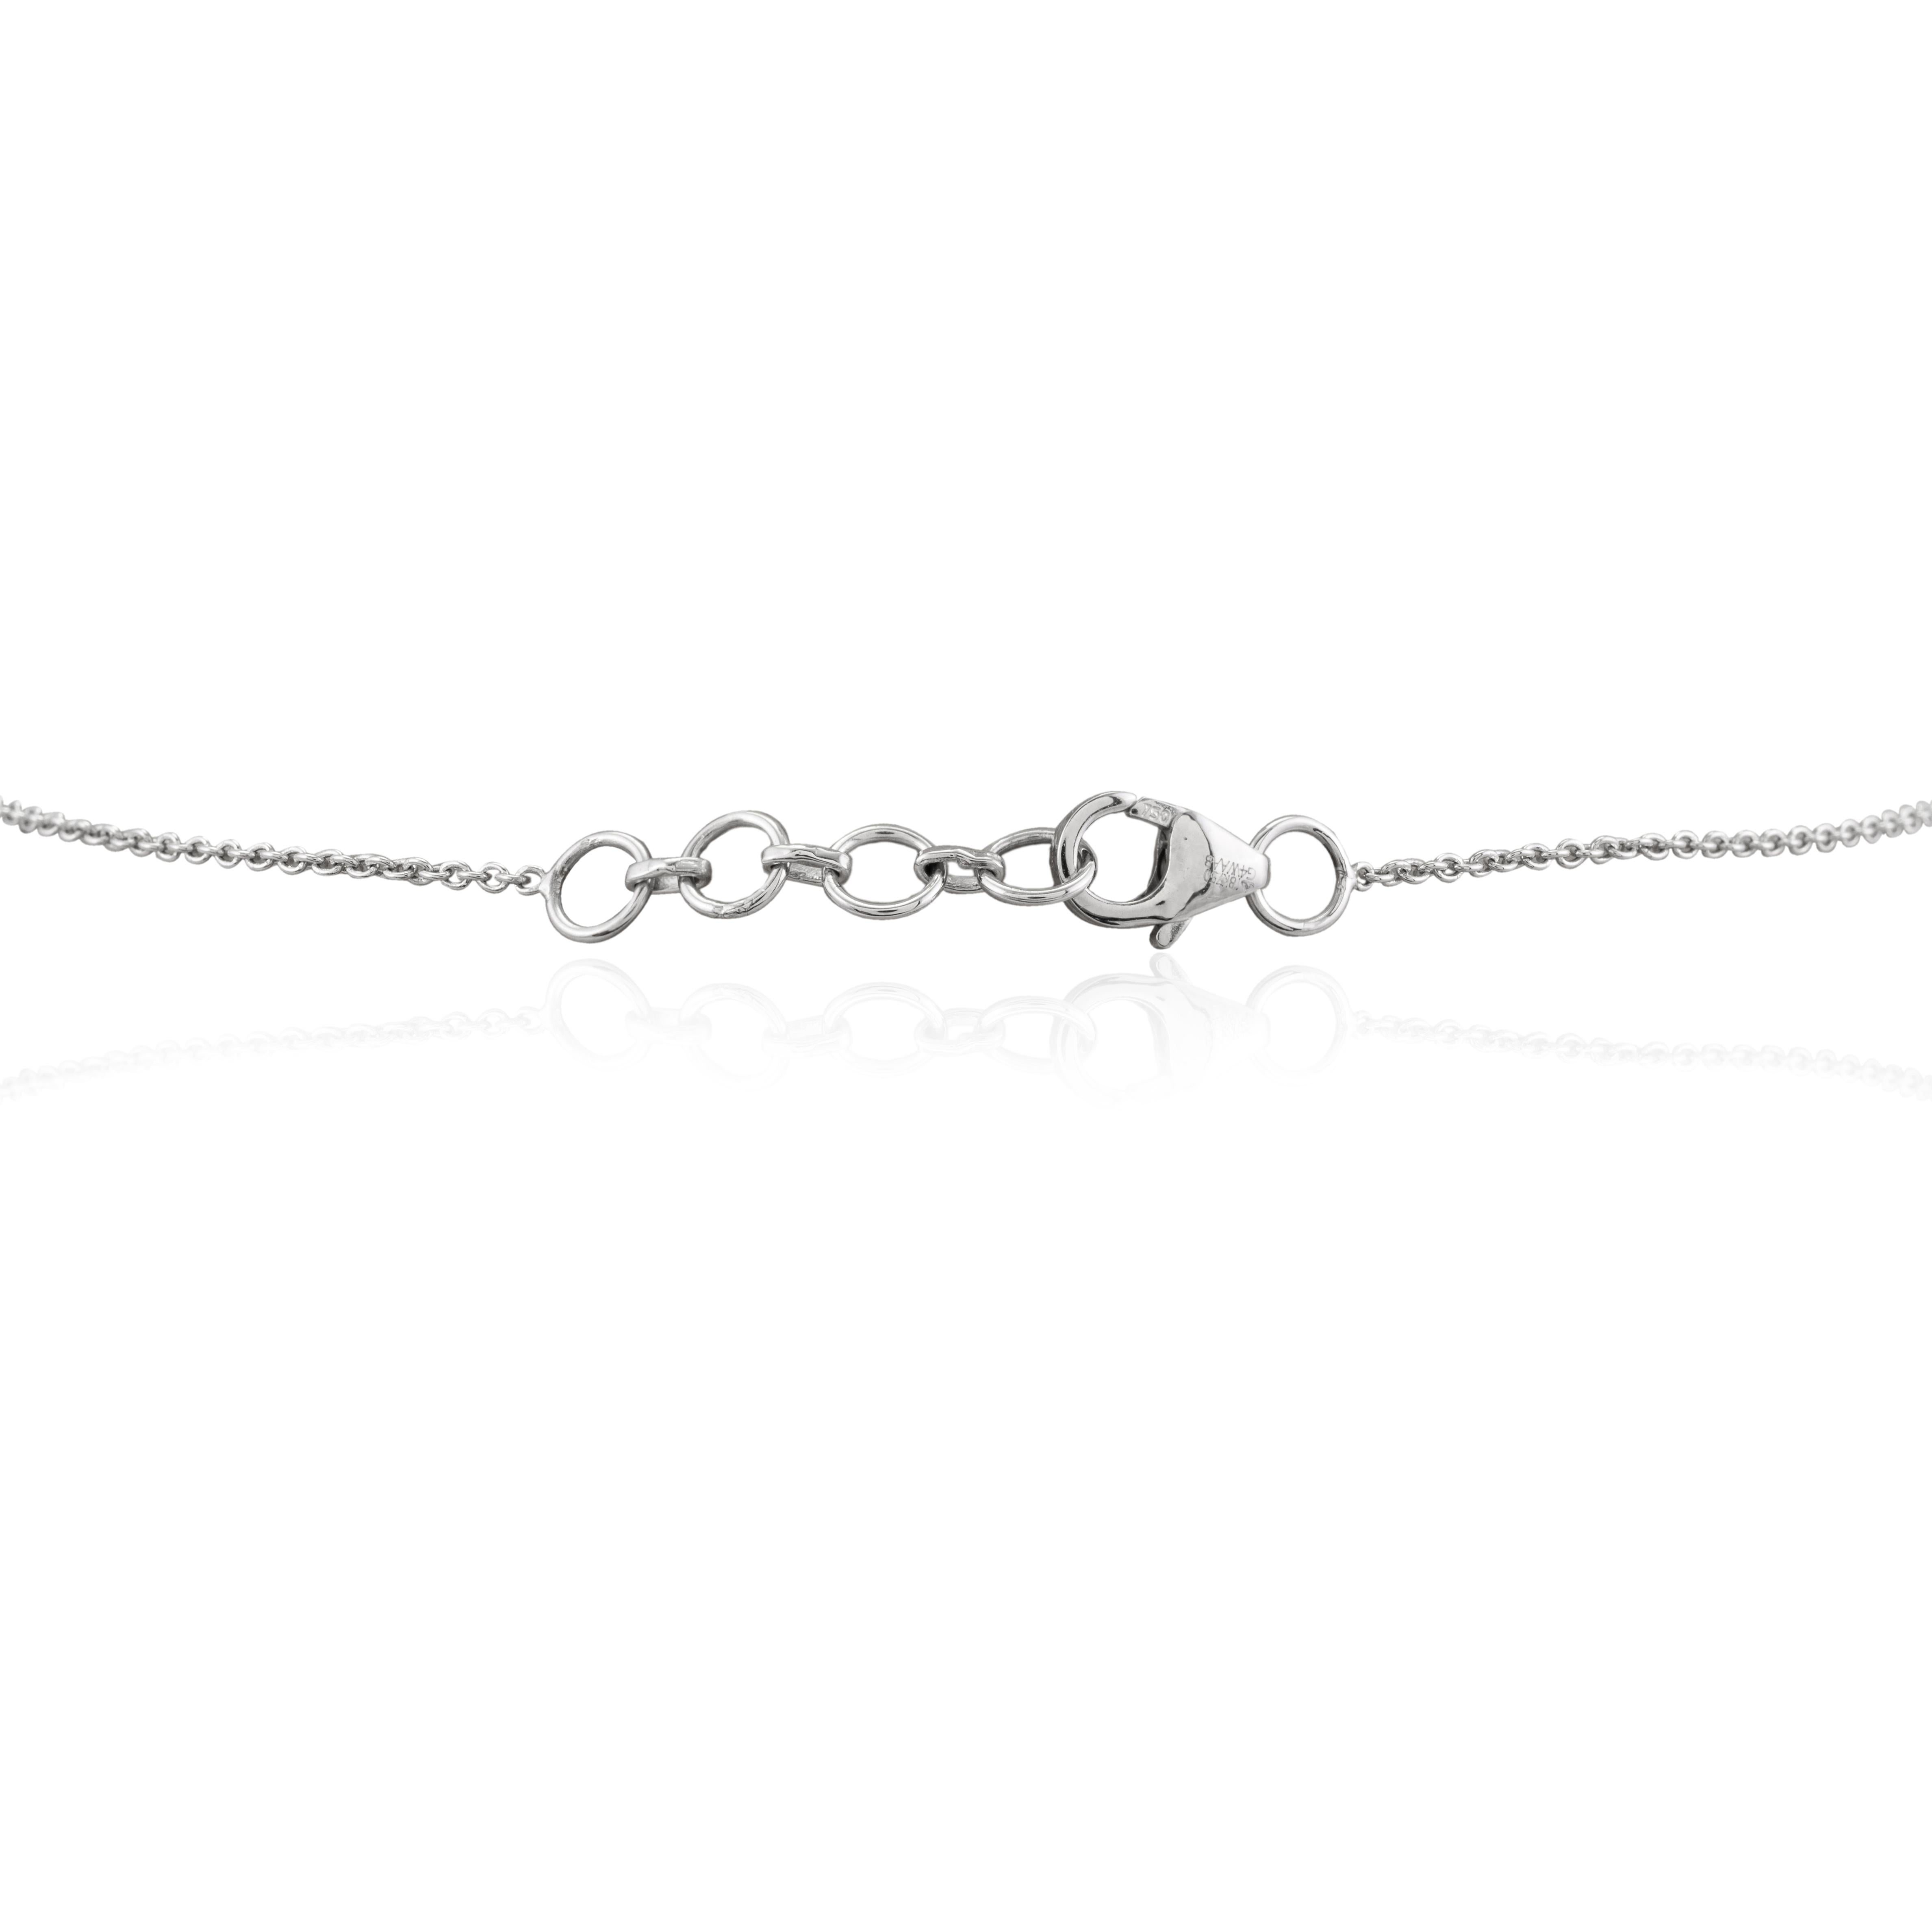 Modernist Heart Diamond Pendant Necklace 18k Solid White Gold, Gift For Her Christmas For Sale